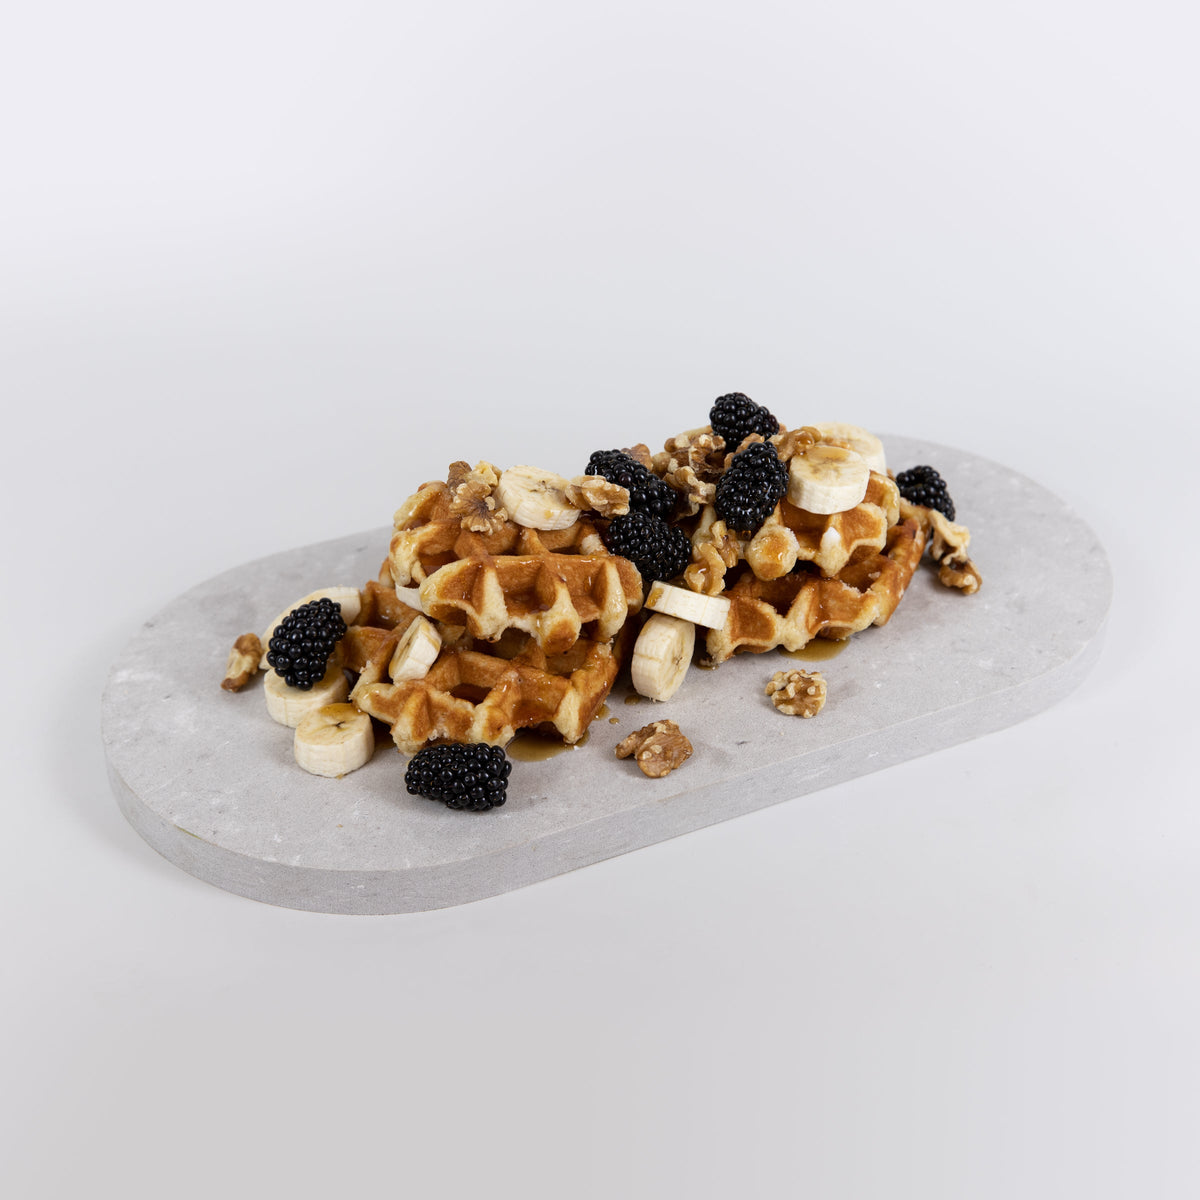 Double arch quartz platters in Caesarstone Clamshell™ created by Aureliia Collection. The Double arch quartz platters shown with waffles, blackberries, banana slices and walnuts drizzled with maple syrup . An excellent home decor gift for someone who has it all.